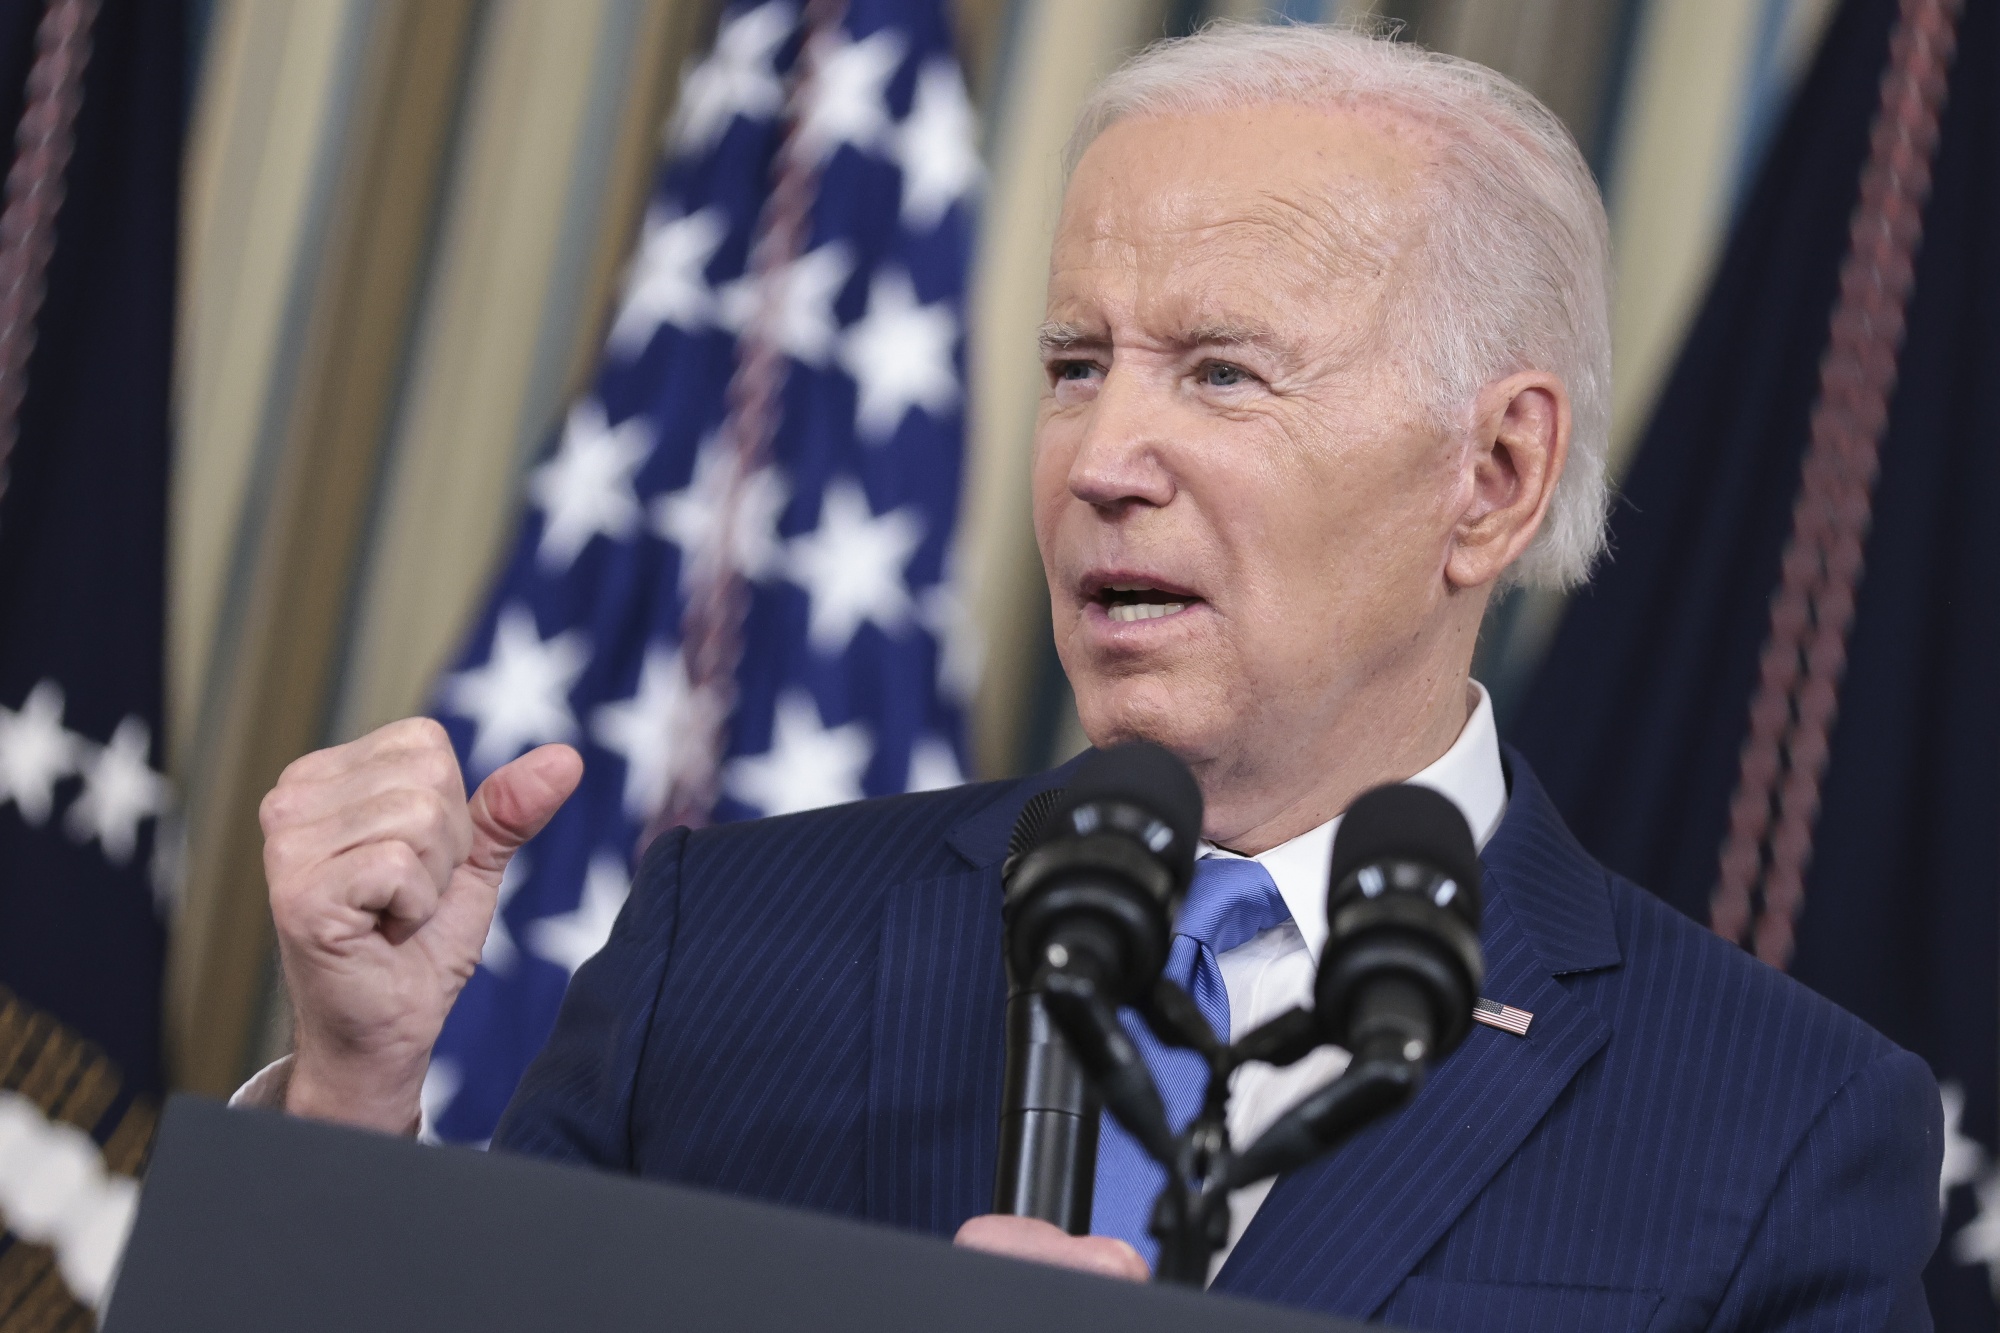 US President Joe Biden speaks during a news conference after this week’s elections